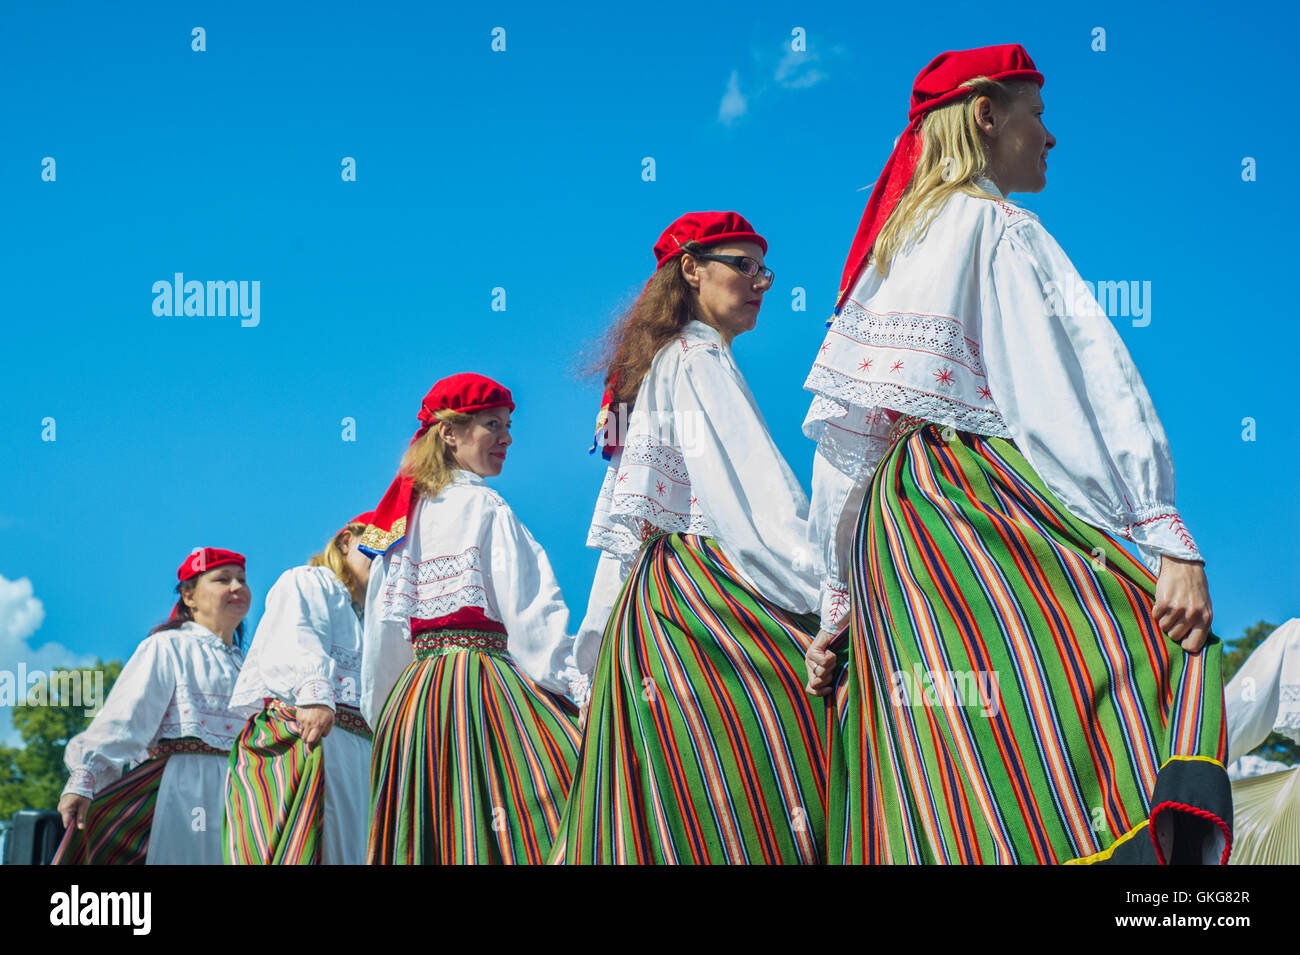 Tallinn, Estonia, 20th August 2016. Folkloric group dances at the Freedom square of Tallinn. On 20th of August the Republic of Estonia celebrates the 25th years since the restoration of Independence after the collapse of the Soviet Union in 1991. Credit:  Nicolas Bouvy/Alamy Live News Stock Photo